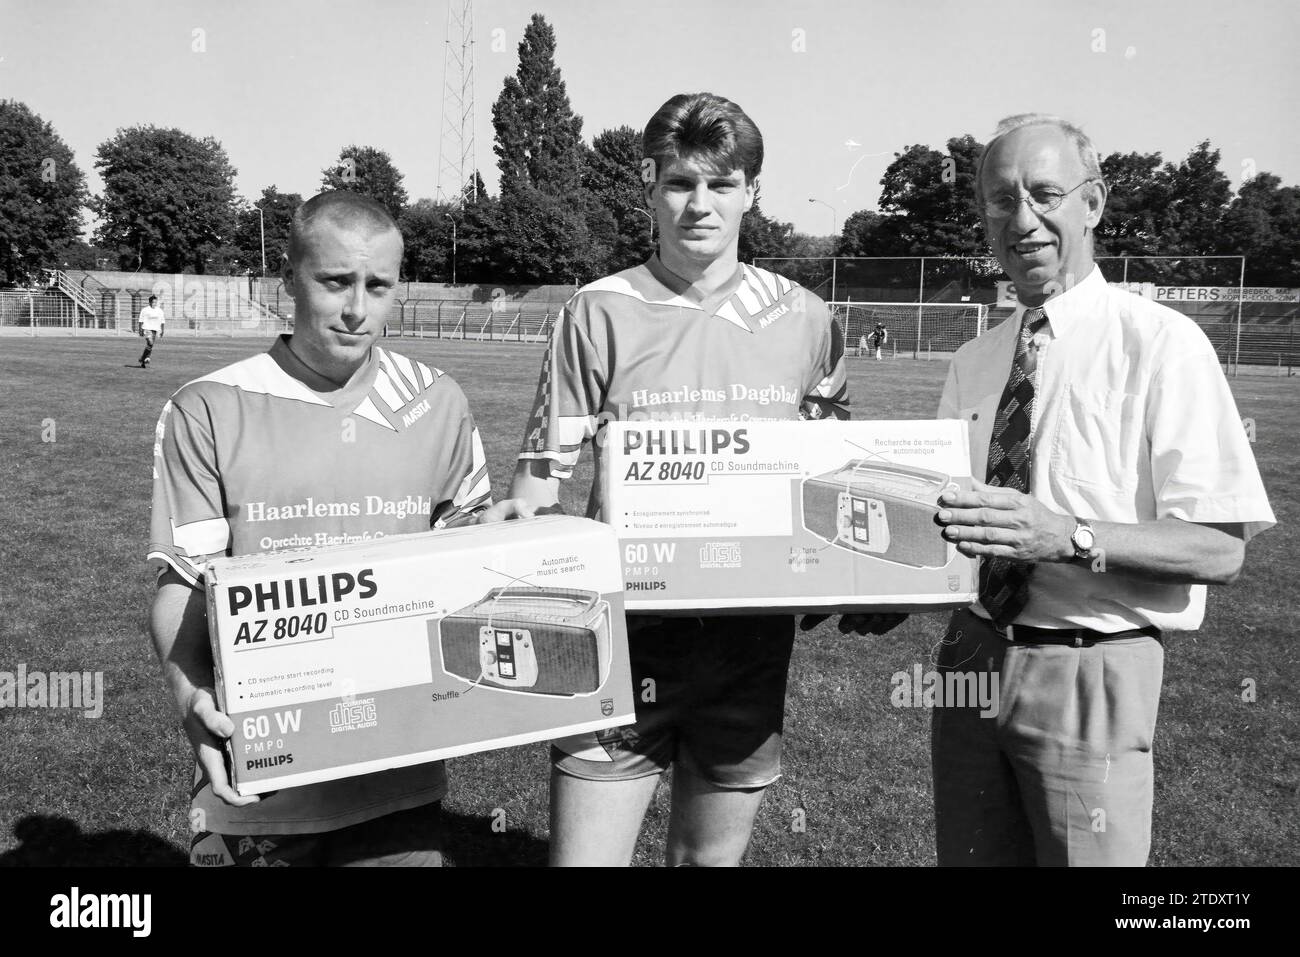 Haarlem players with Philips radio during the Haarlem-Kennemerland amateurs match, 03-08-1996, Whizgle News from the Past, Tailored for the Future. Explore historical narratives, Dutch The Netherlands agency image with a modern perspective, bridging the gap between yesterday's events and tomorrow's insights. A timeless journey shaping the stories that shape our future. Stock Photo